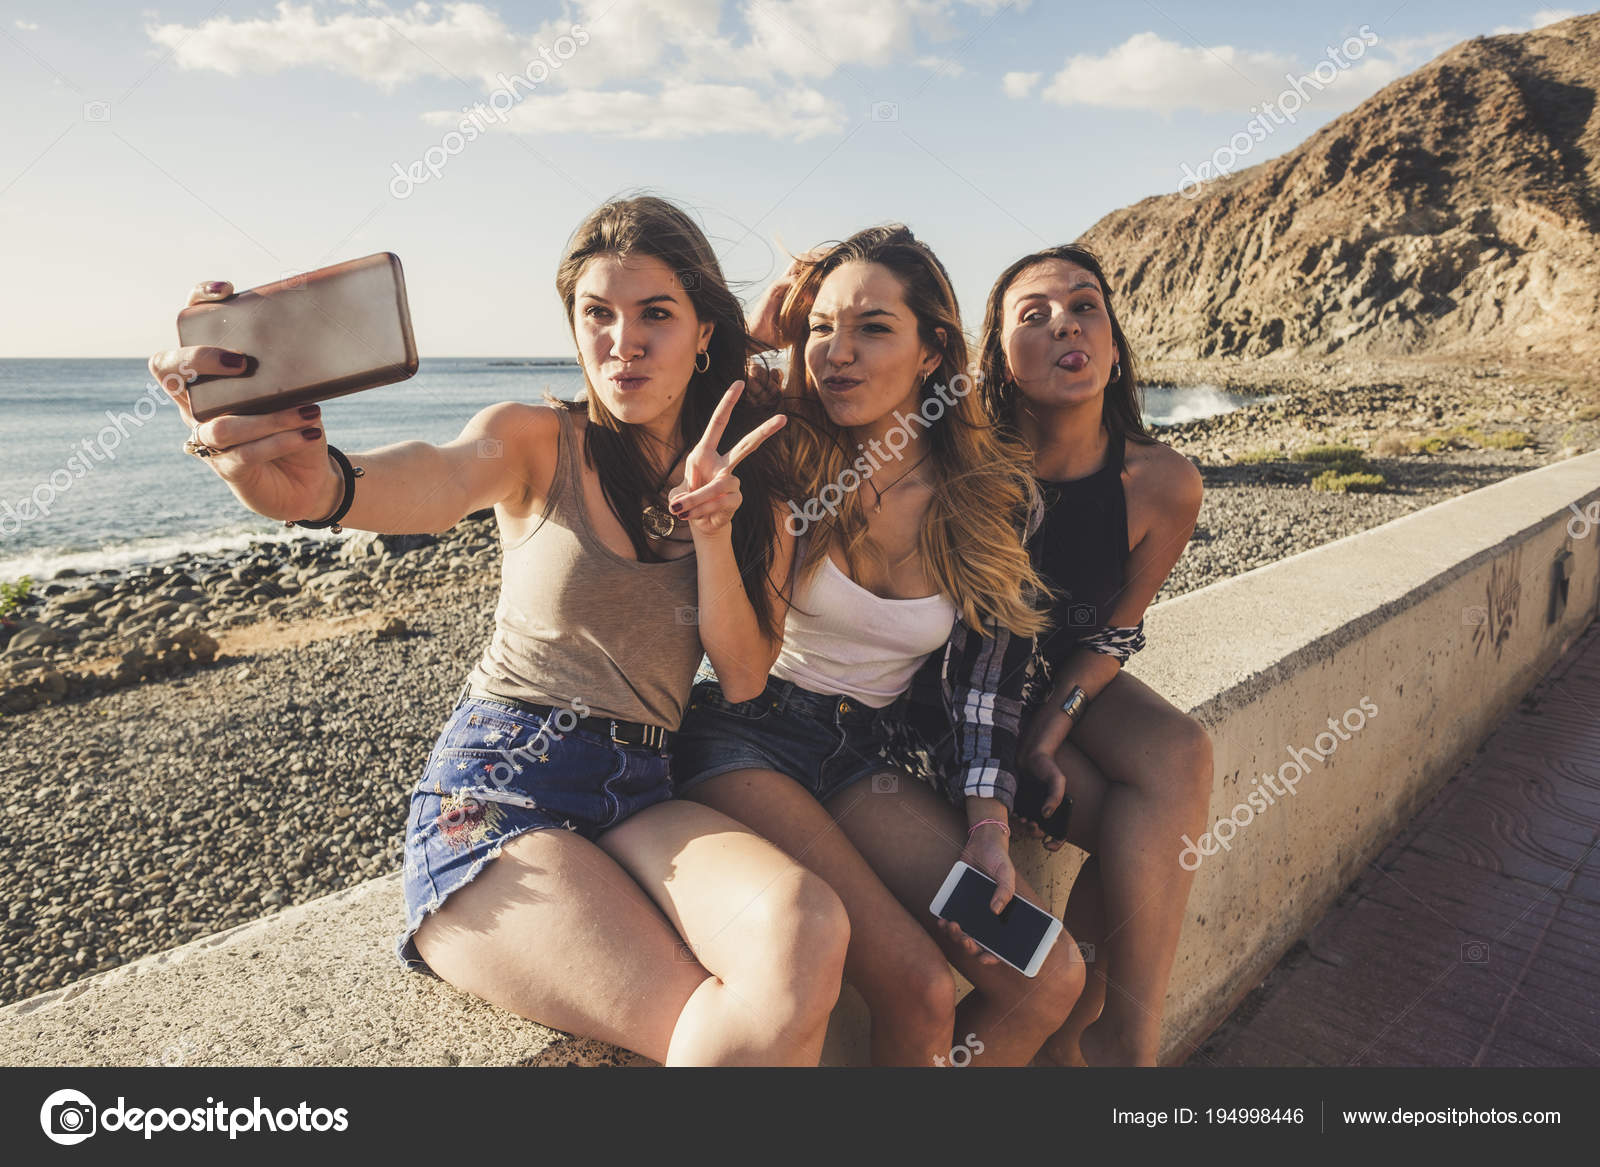 Image result for friendship selfies